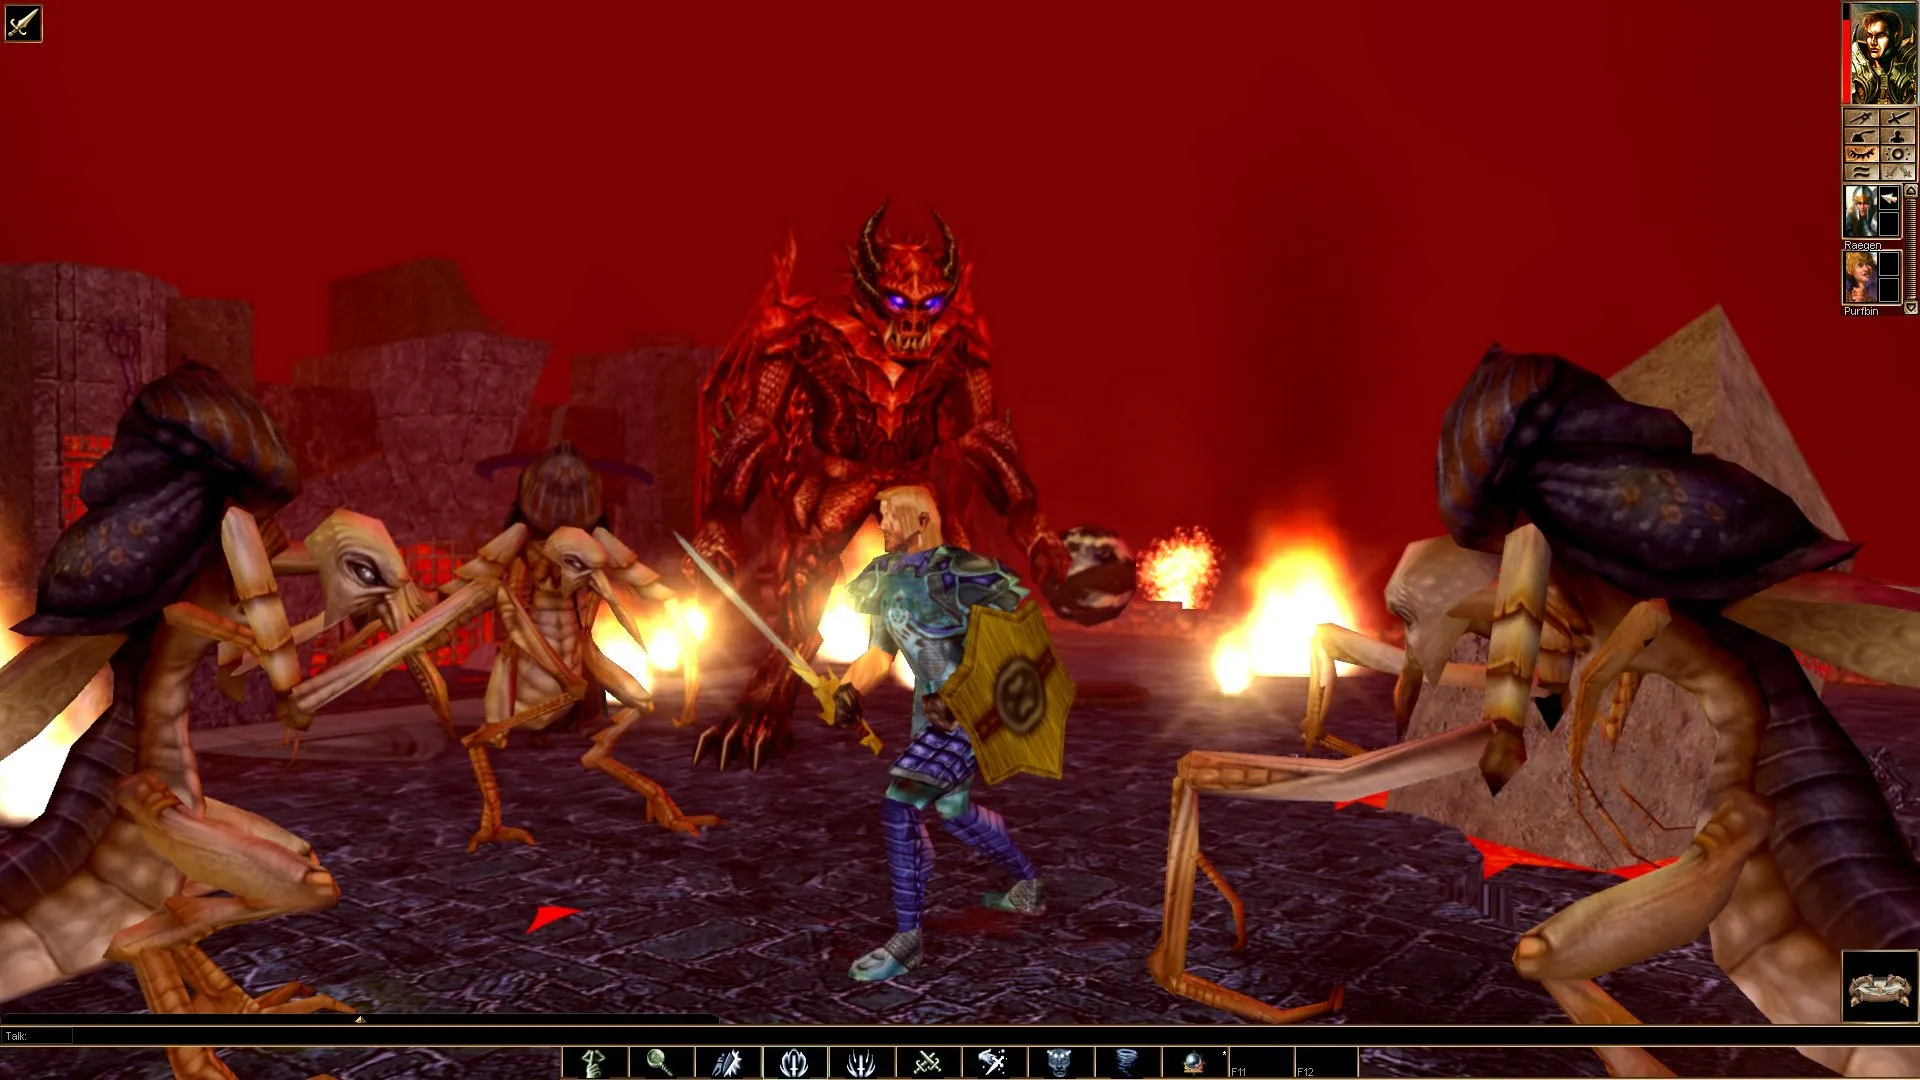 D&D Classics Fall lot a whole brings RPGs Enhanced of consoles – Destructoid classic to this